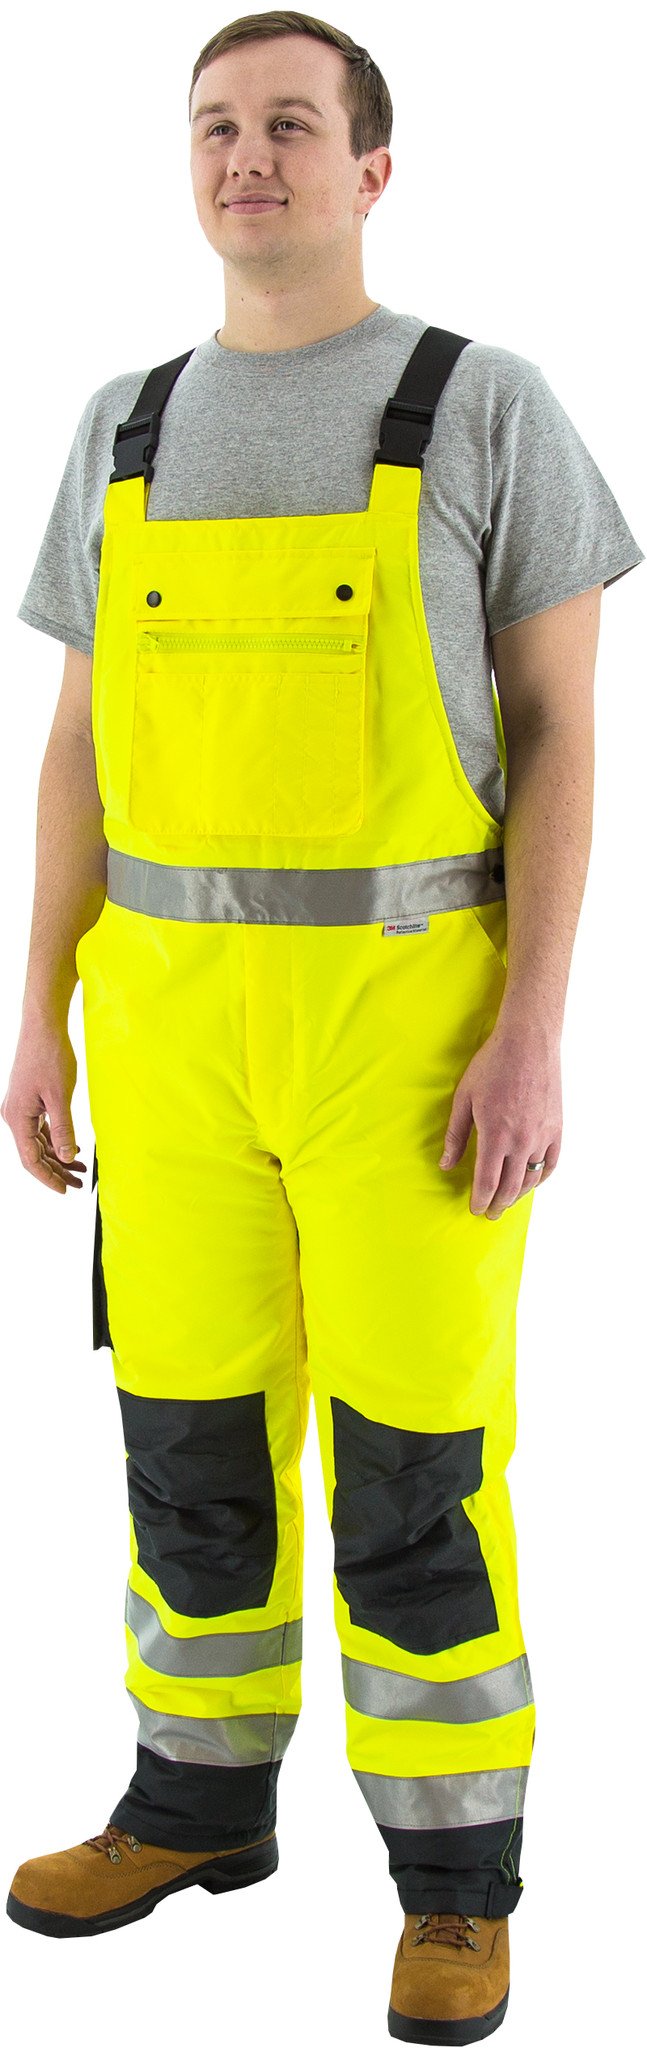 Majestic 75-2357 High Visibility Quilted, Insulated Waterproof Bib Overall - Yellow/Black